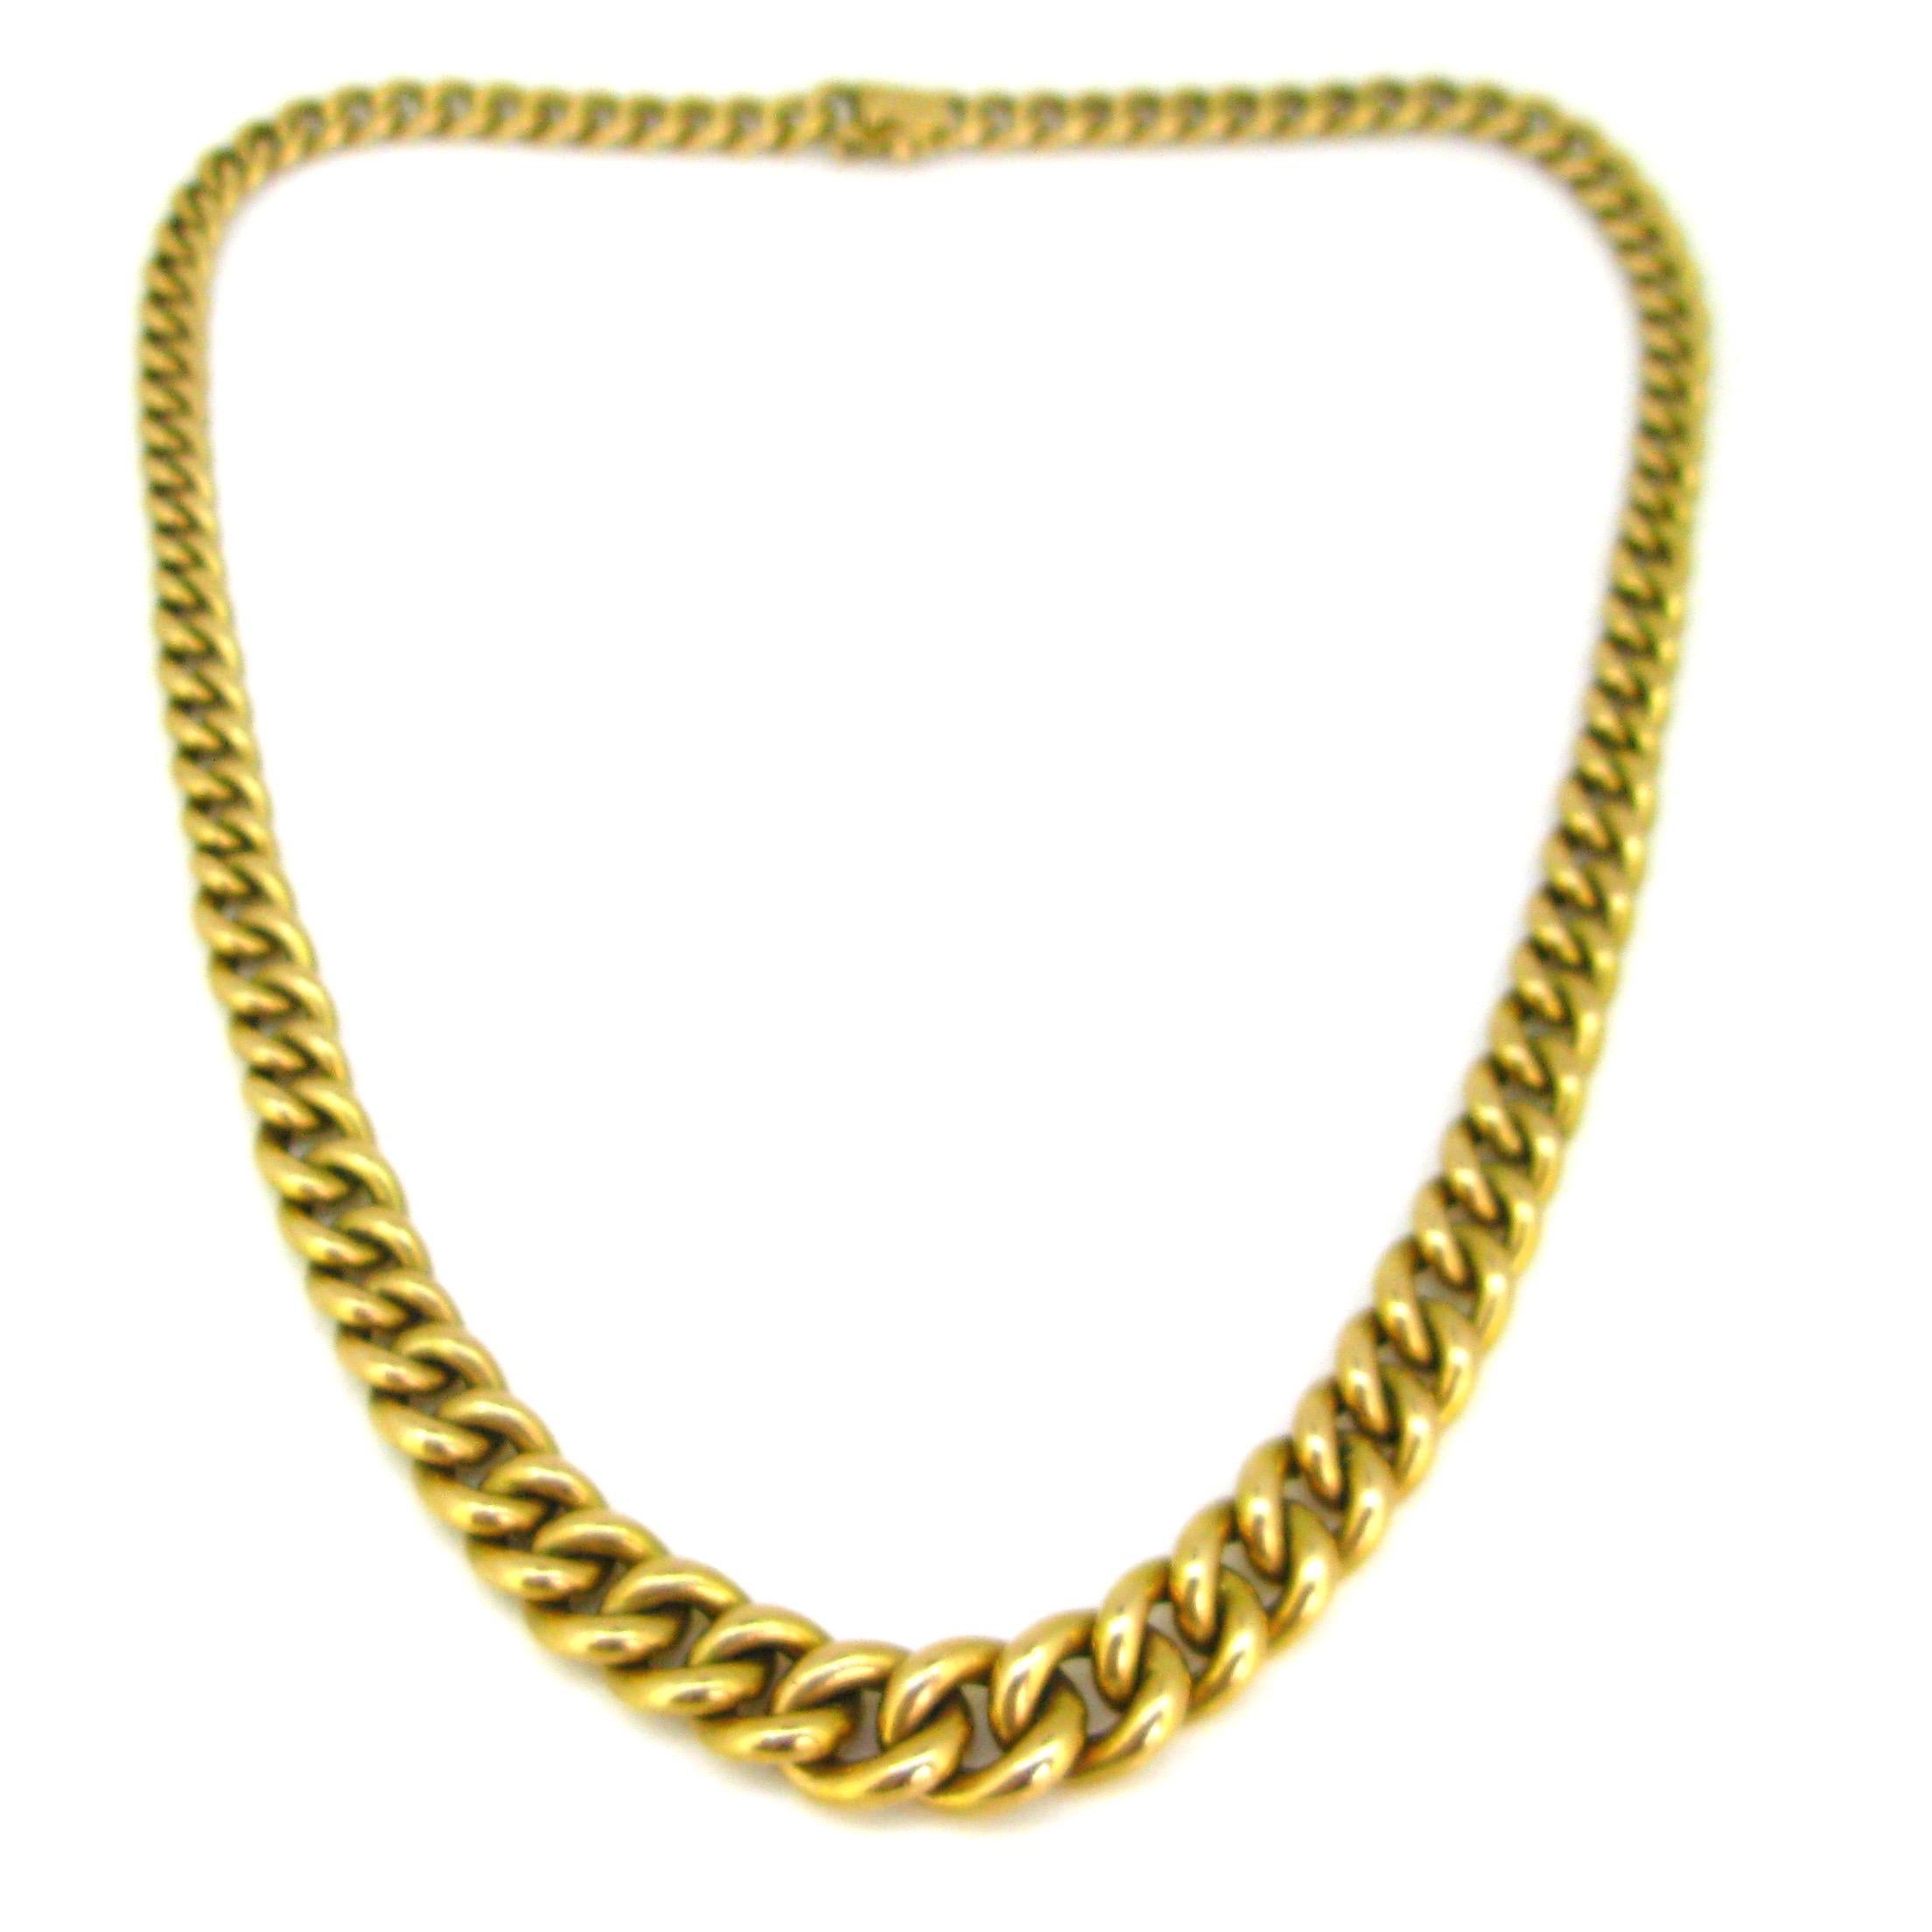 This curb links necklace is fully made in 18kt yellow “fort d’or’ gold. The necklace is 44cm /18in long. The gold is shiny and smooth. The clasp is marked with the French eagle’s head for 18k gold. It is from the Forties era and it is in very good